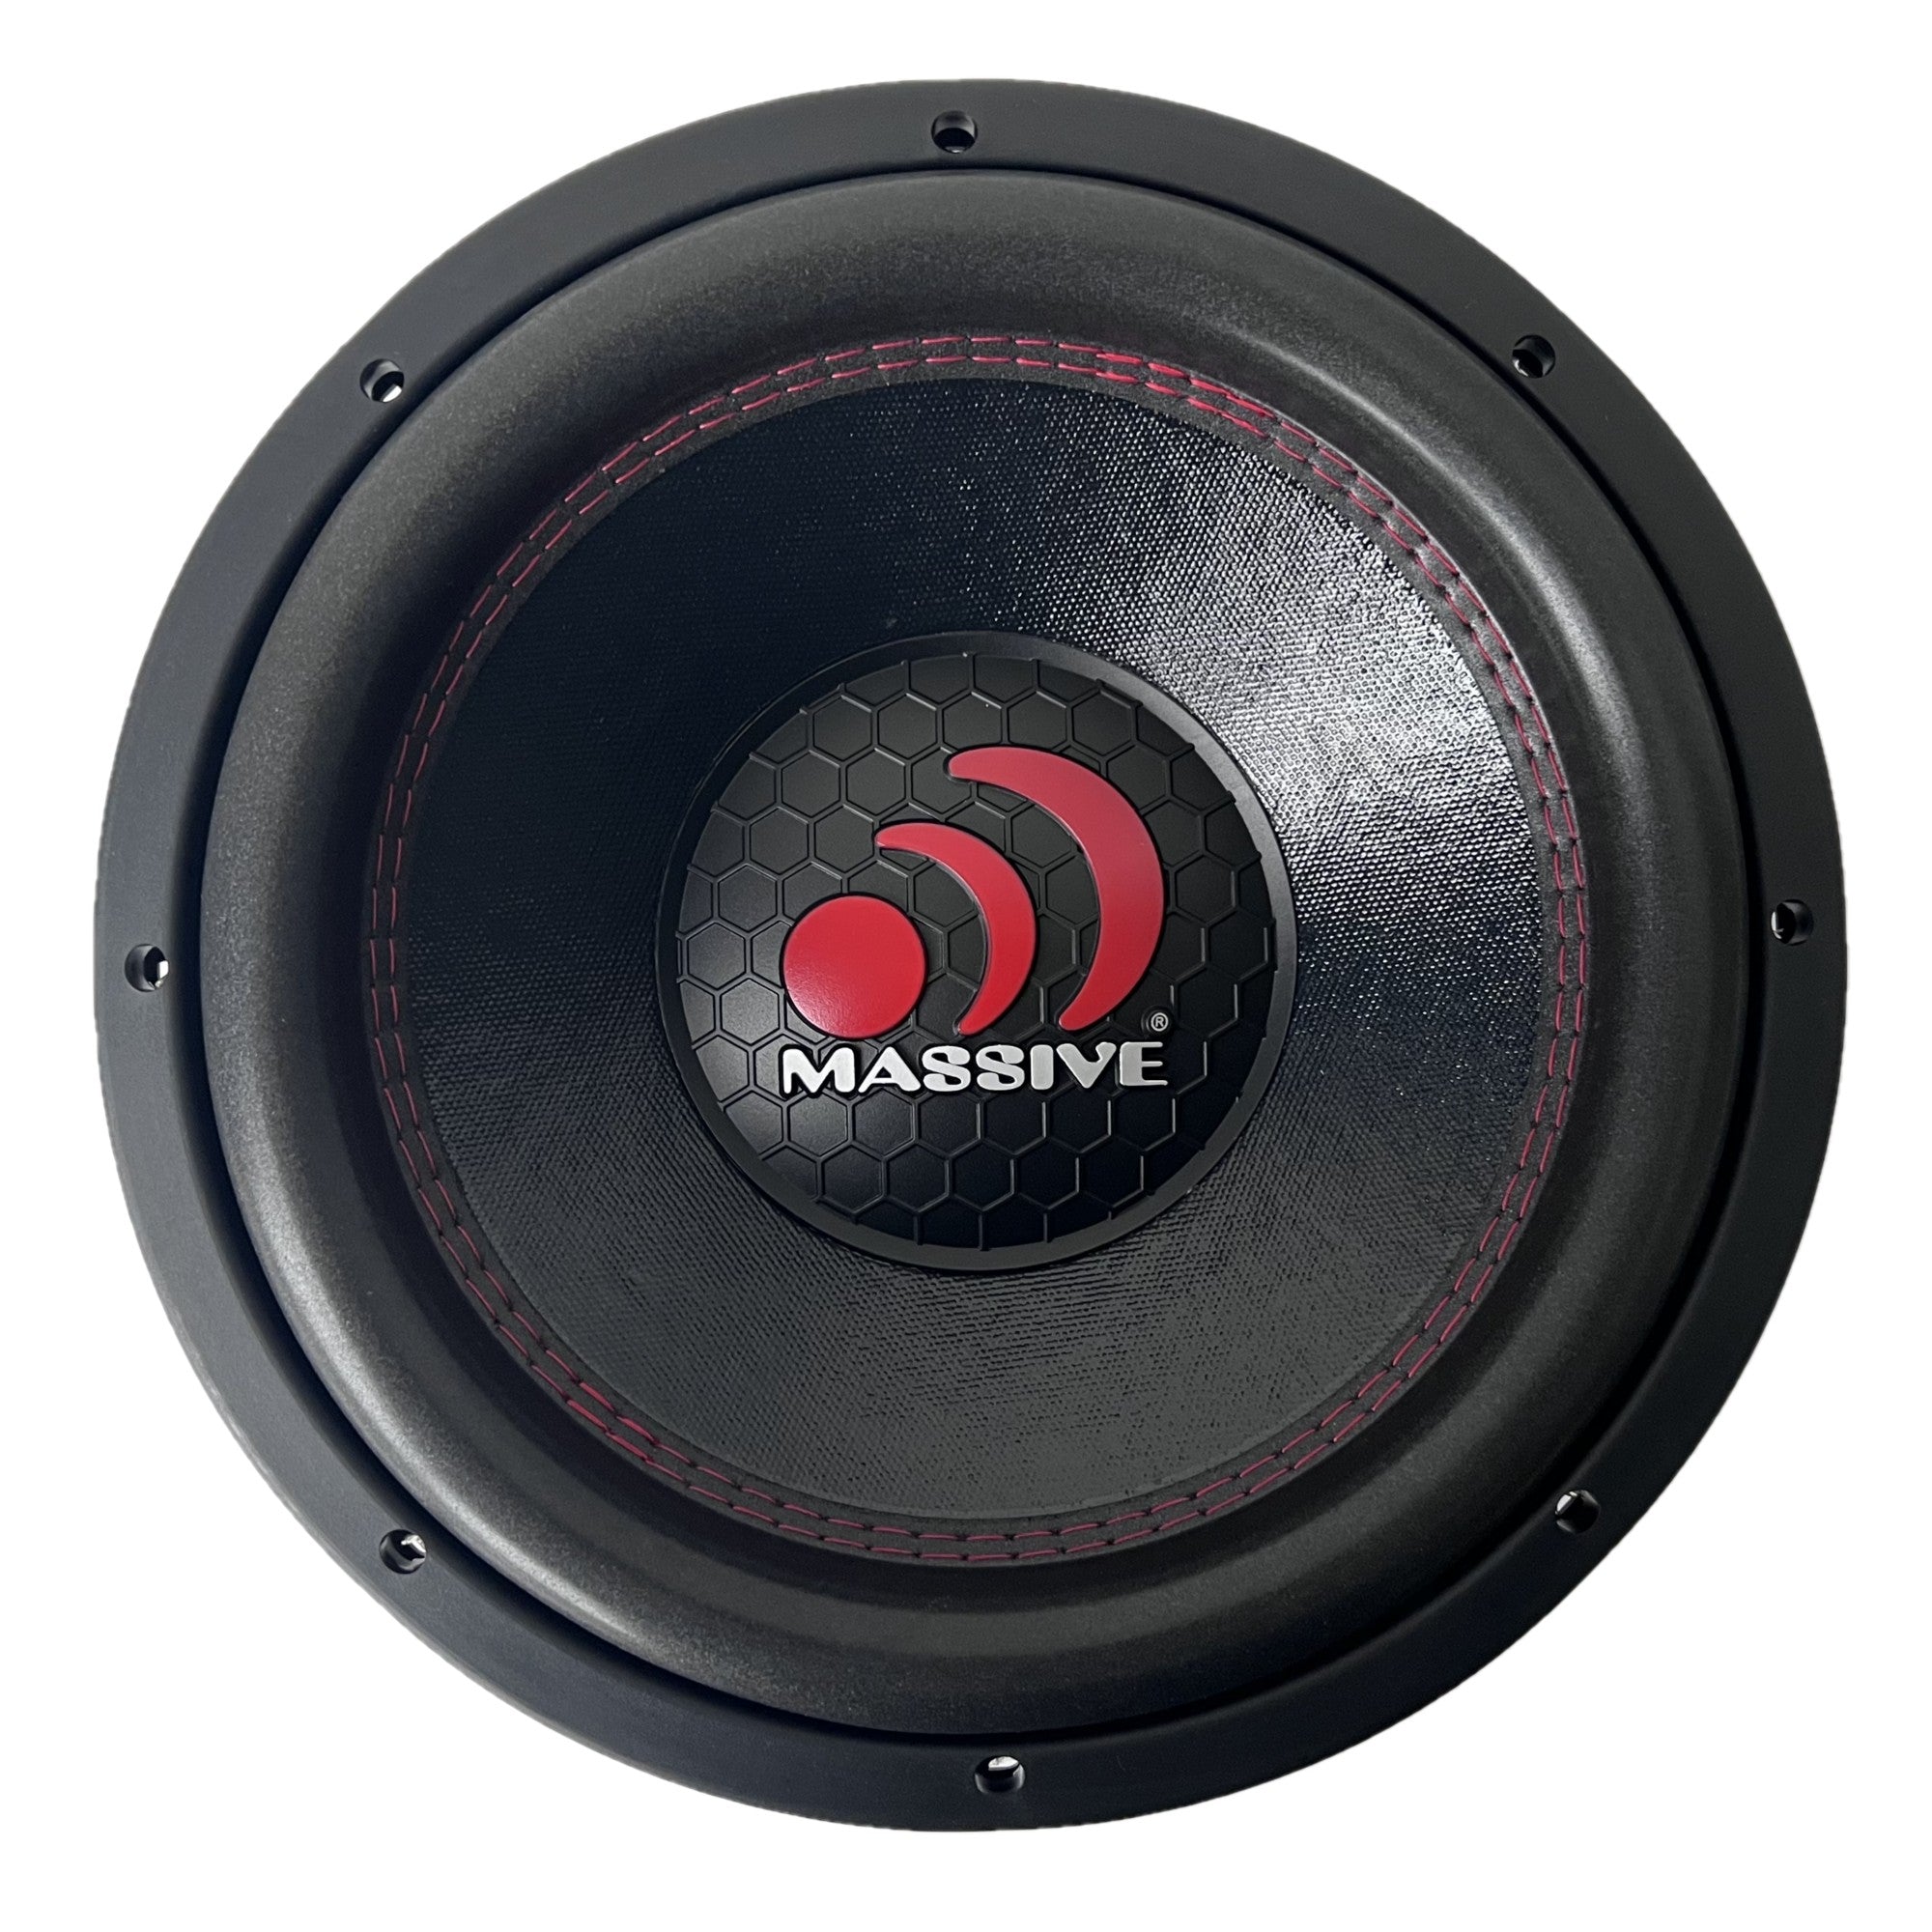 GTX124H - 12" 800 Watts RMS Dual 4 Ohm Subwoofer